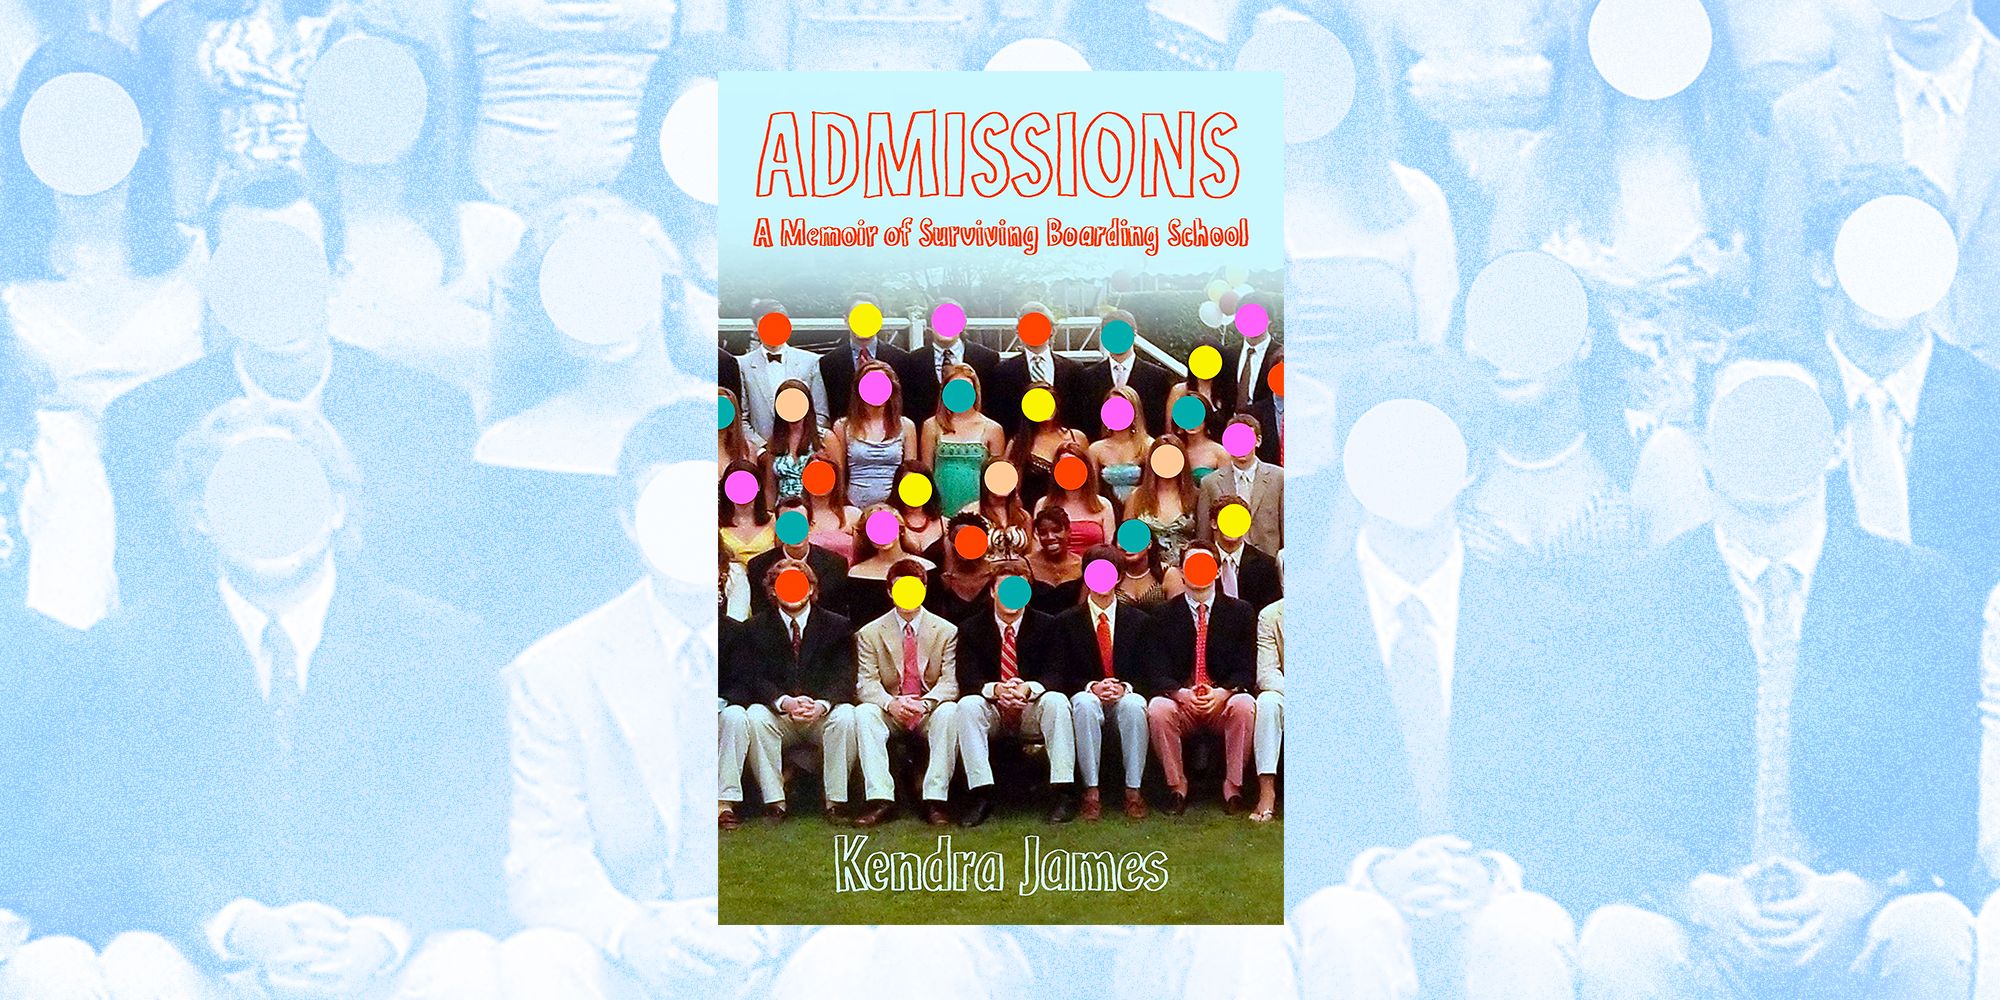 admissions by kendra james